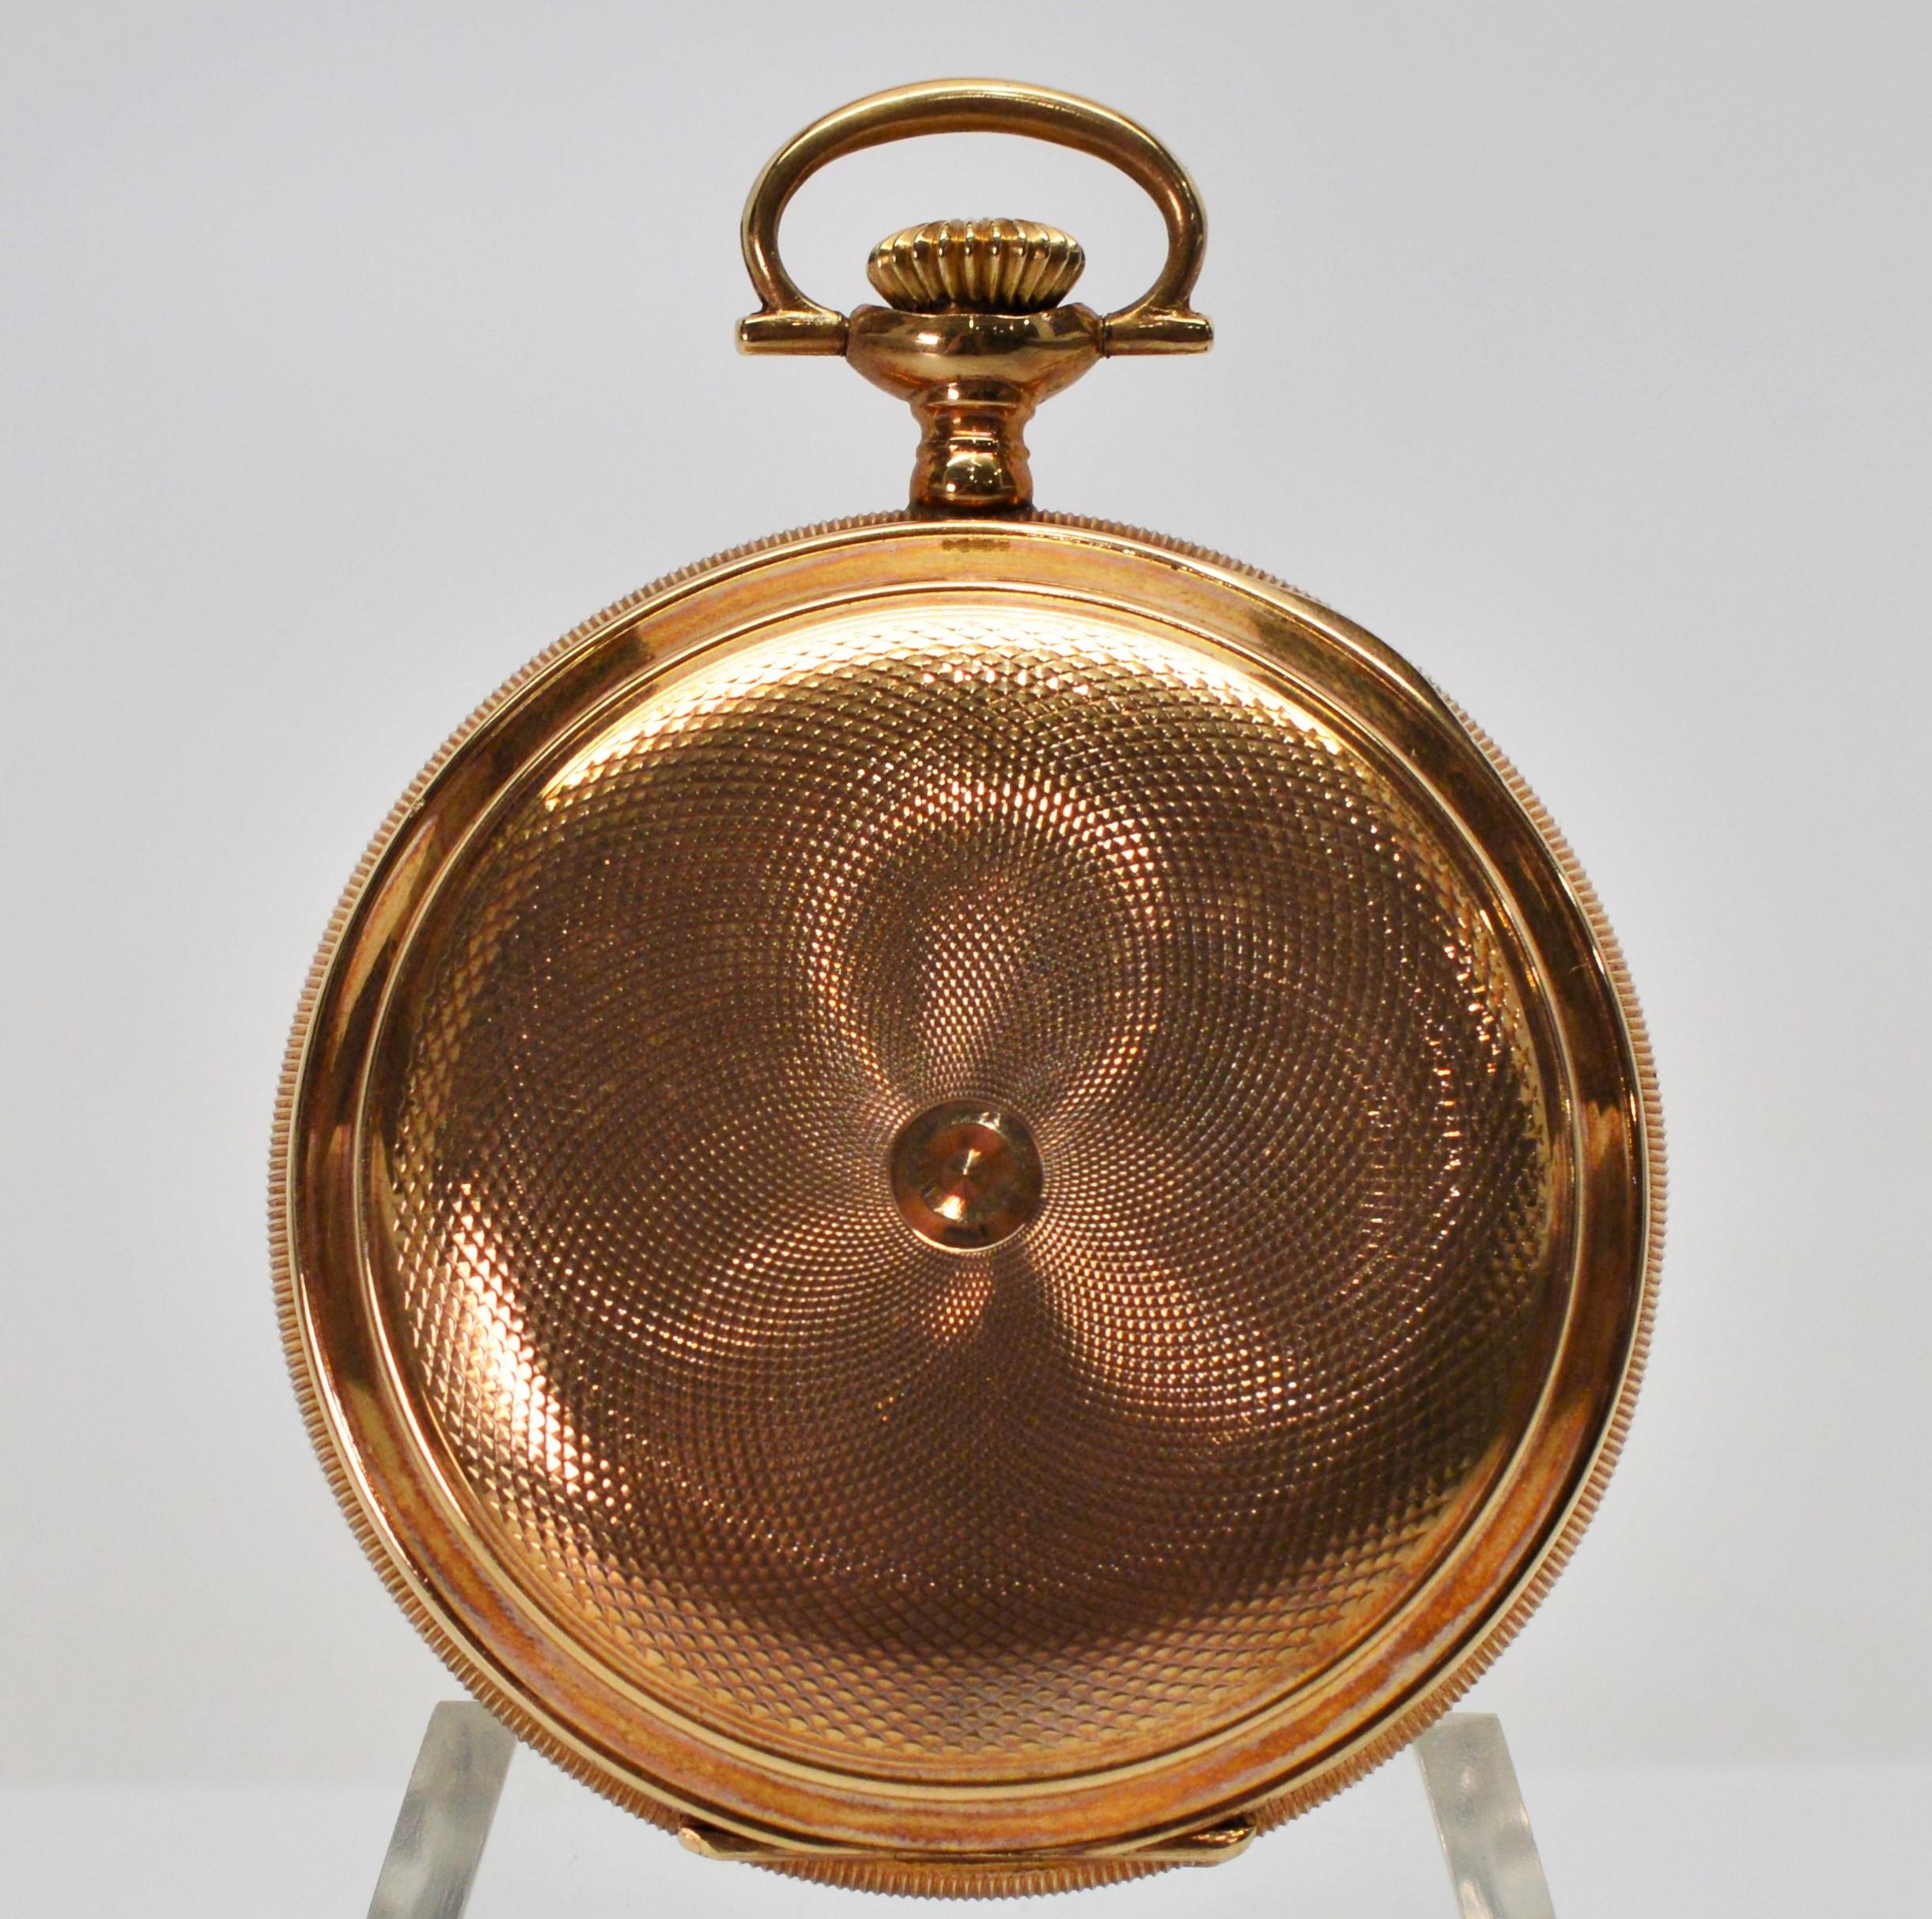 American Waltham Co. Antique Yellow Gold Pocket Watch 2